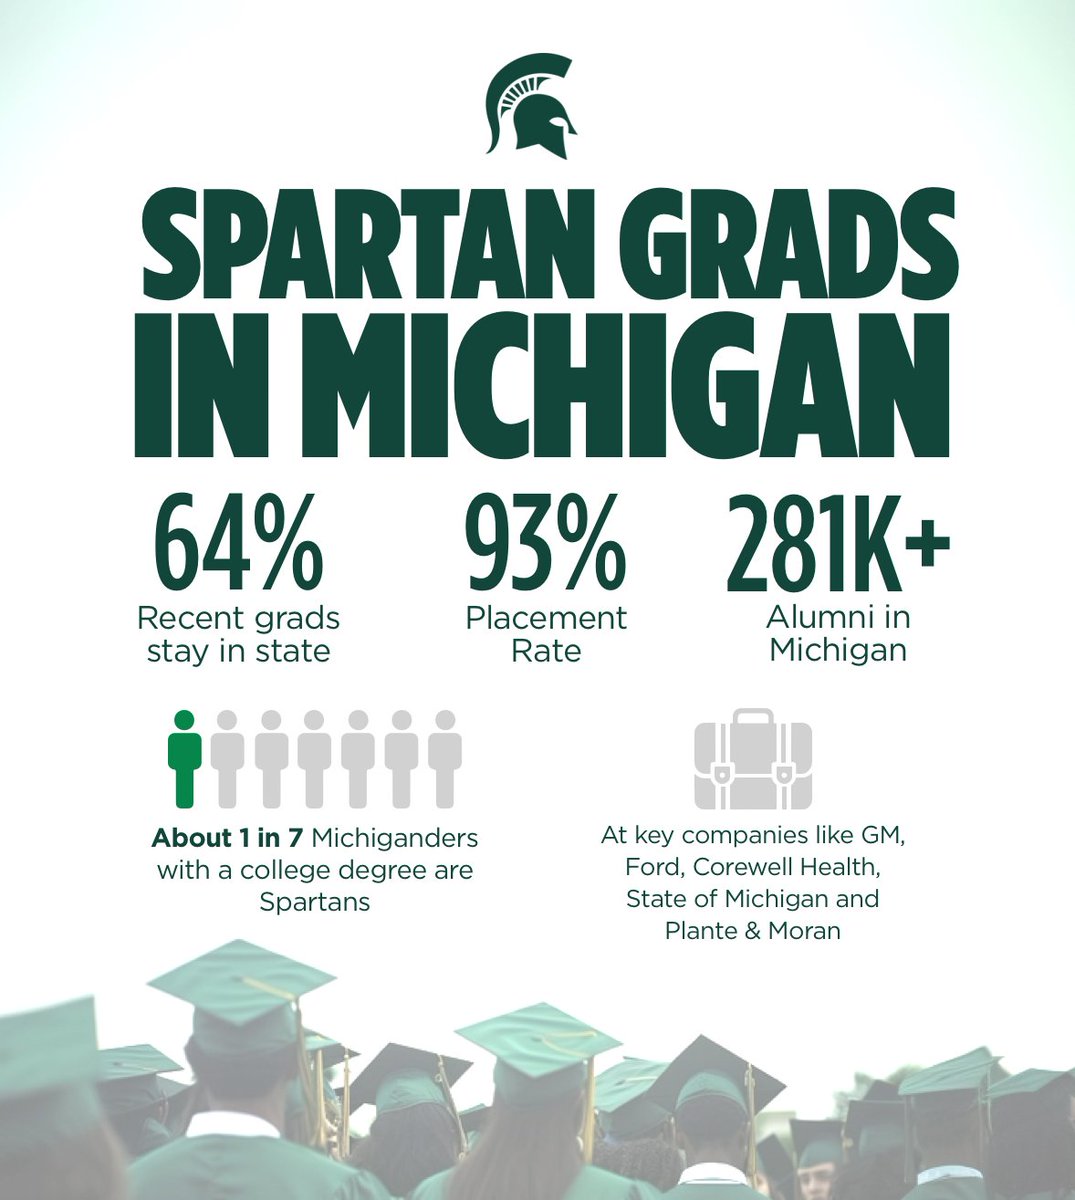 Spartans help make our great state a place of innovation and opportunity. #SpartanGrad24